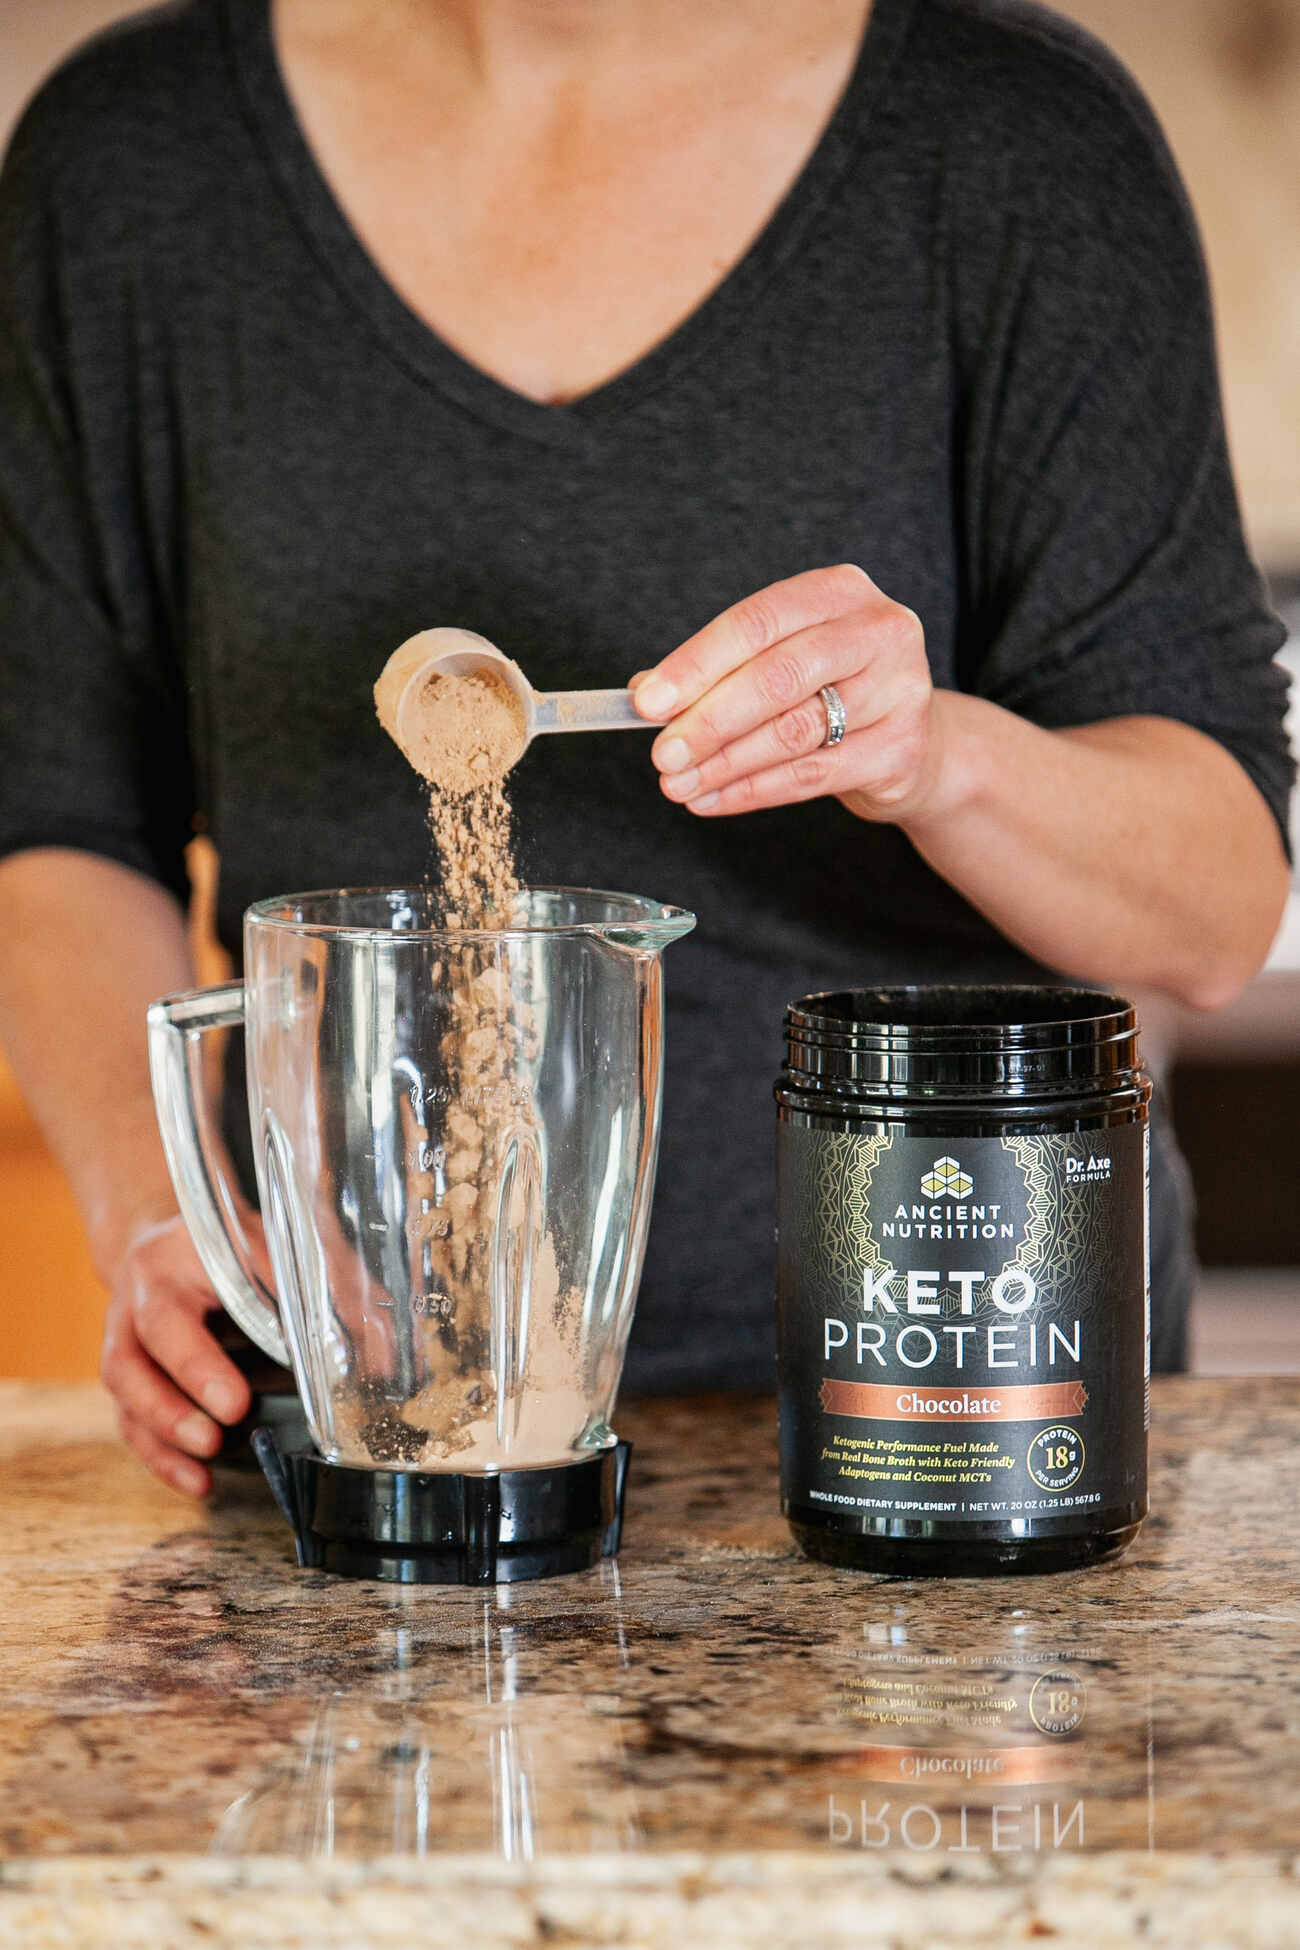 Woman pouring chocolate keto protein powder from Ancient Nutrition into a glass blender